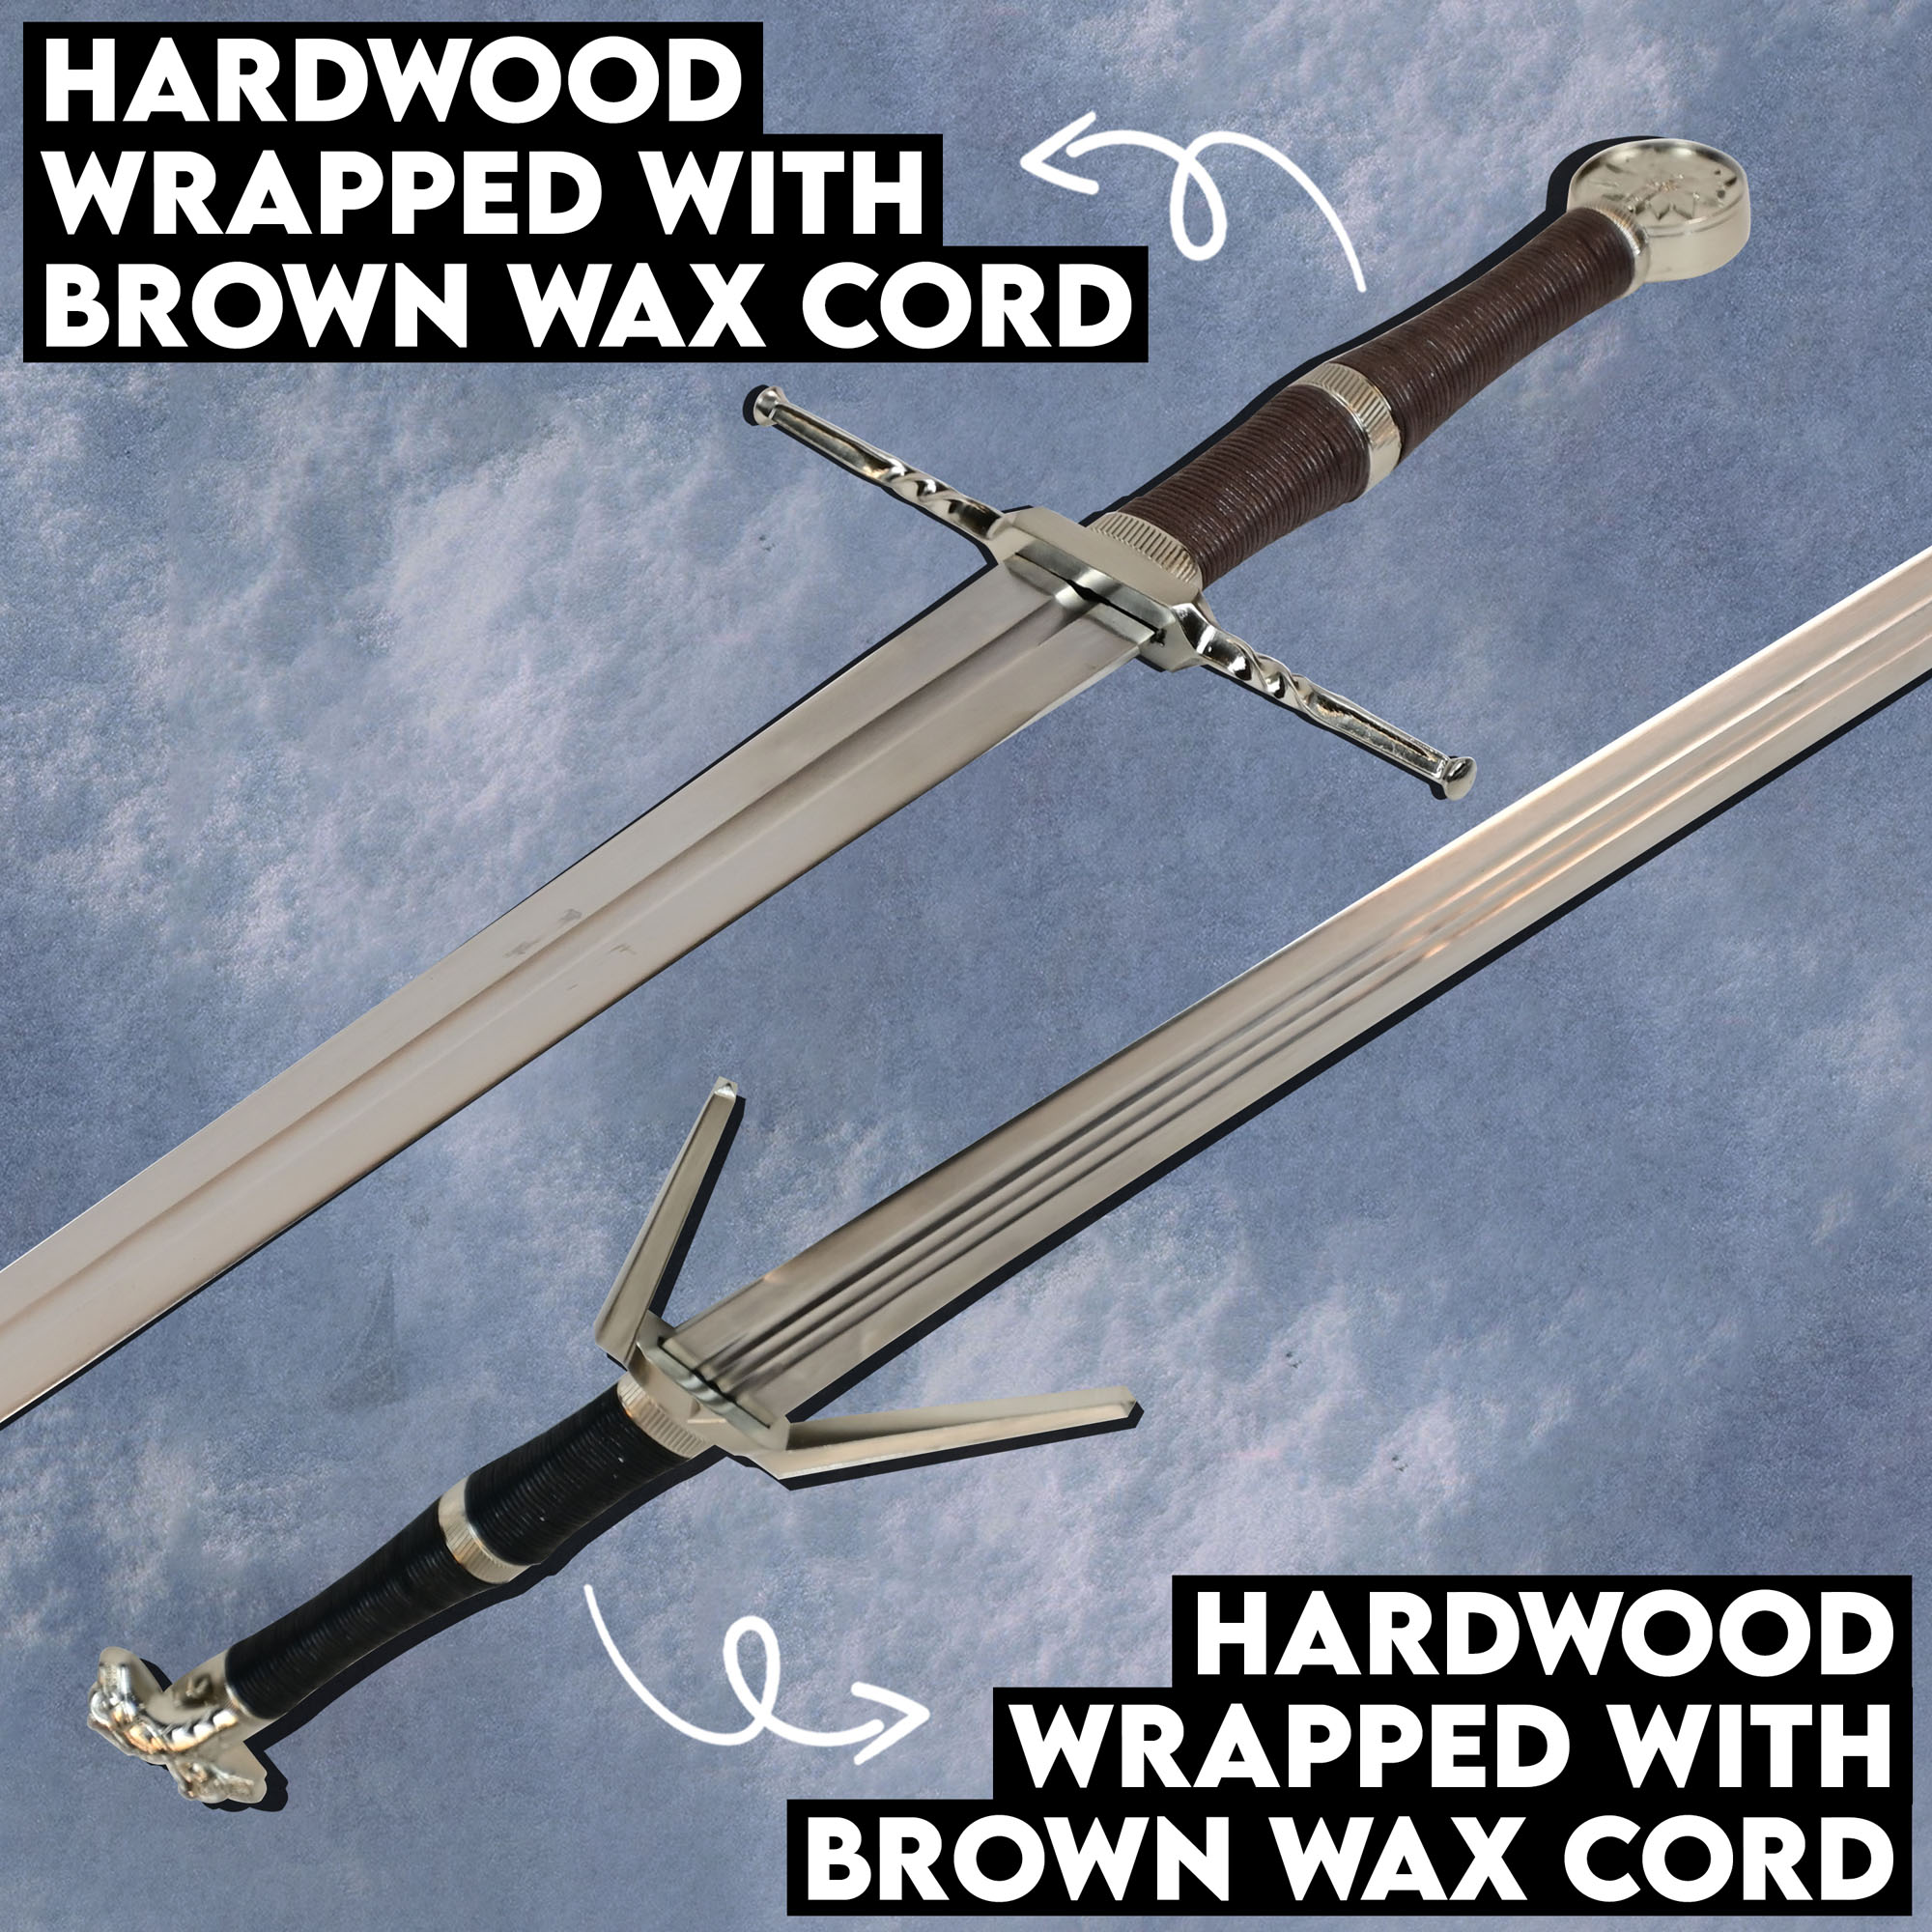 The Witcher Sword Set - Silver + Steel Sword (Bundle of 40660 and 40659)